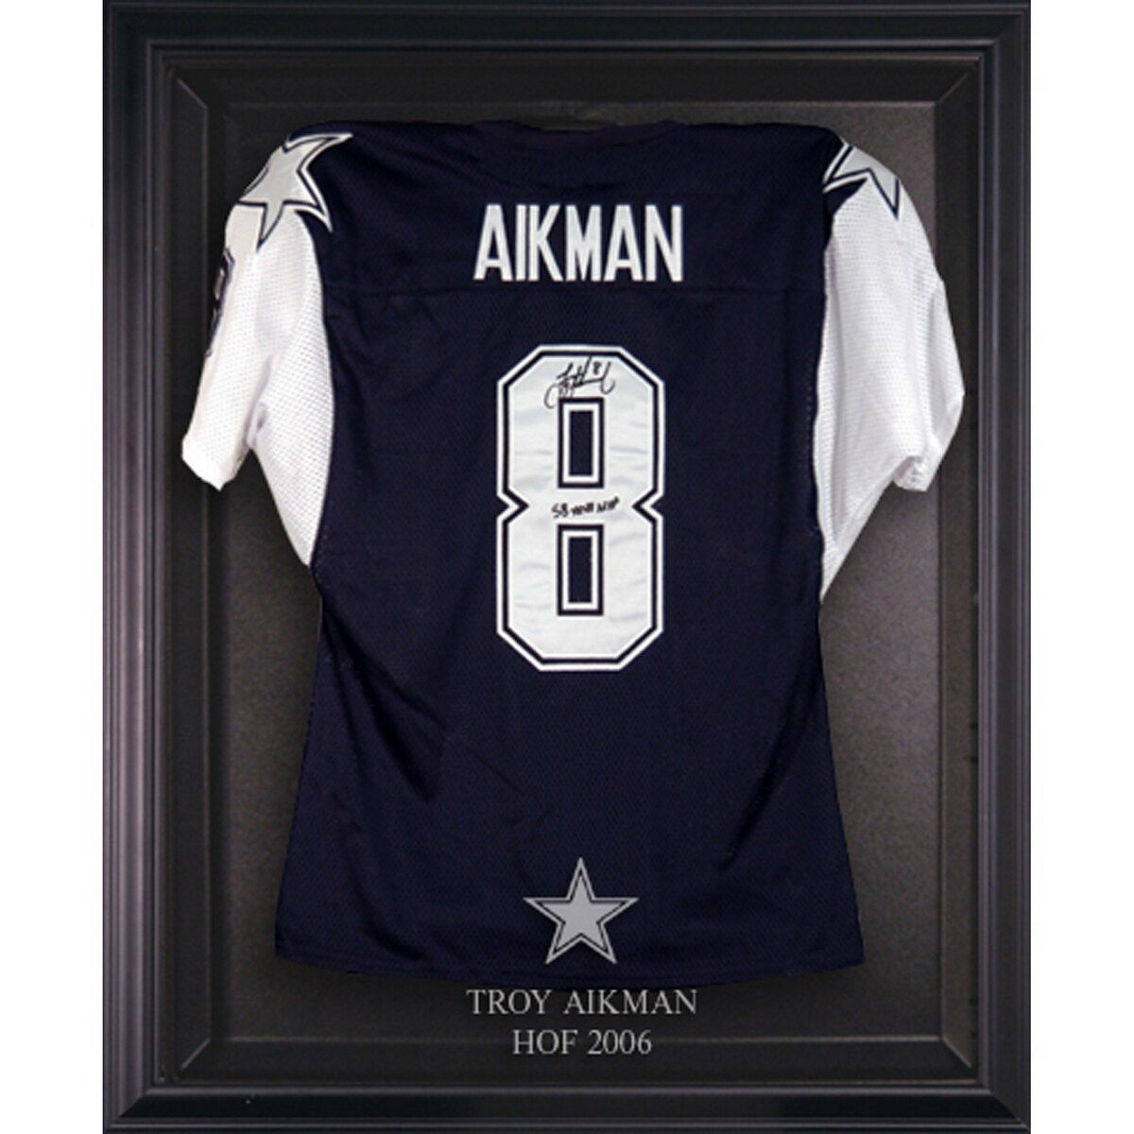 Fanatics Authentic Troy Aikman Dallas Cowboys Black Framed Hall of Fame Jersey Display Case - Image 2 of 2